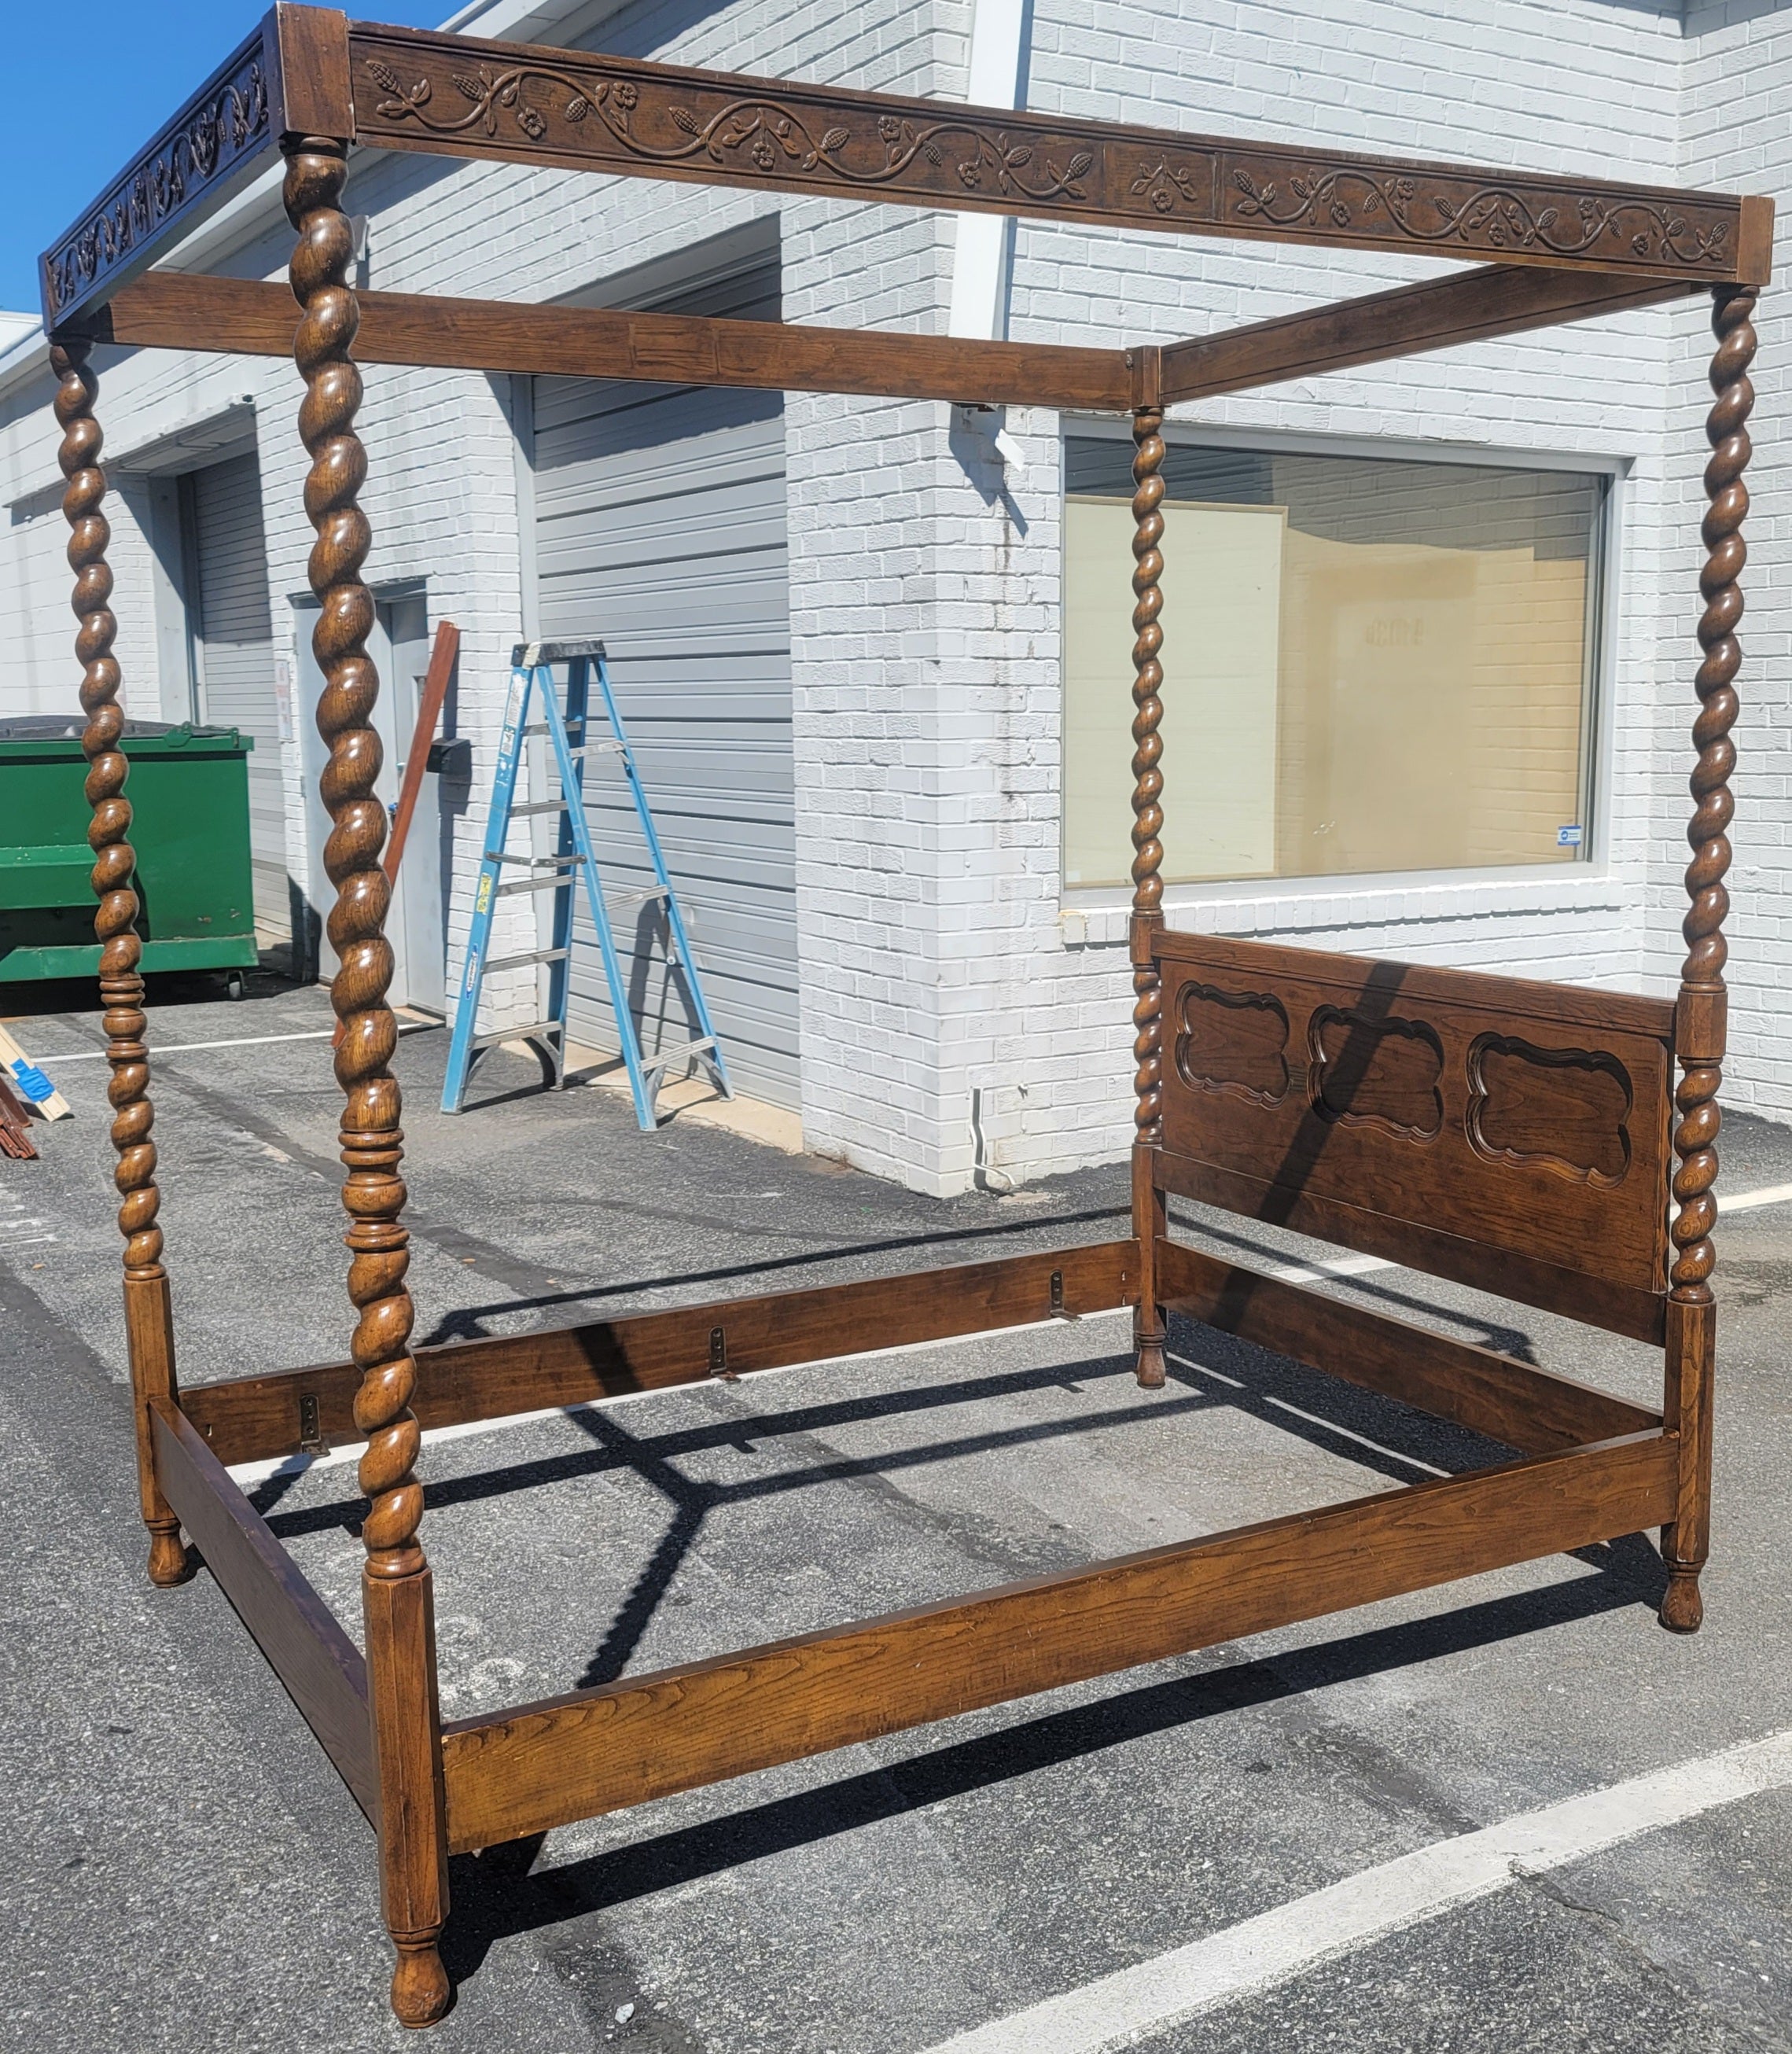 A gorgeous Vintage Carved Oak Canopy bed with Barley Twist Posters. Flower and branches wood carvings on 4 sides of the canopy. Attached brackets to side rails support the box spring. Panelized headboard. Bed Measures 85.5